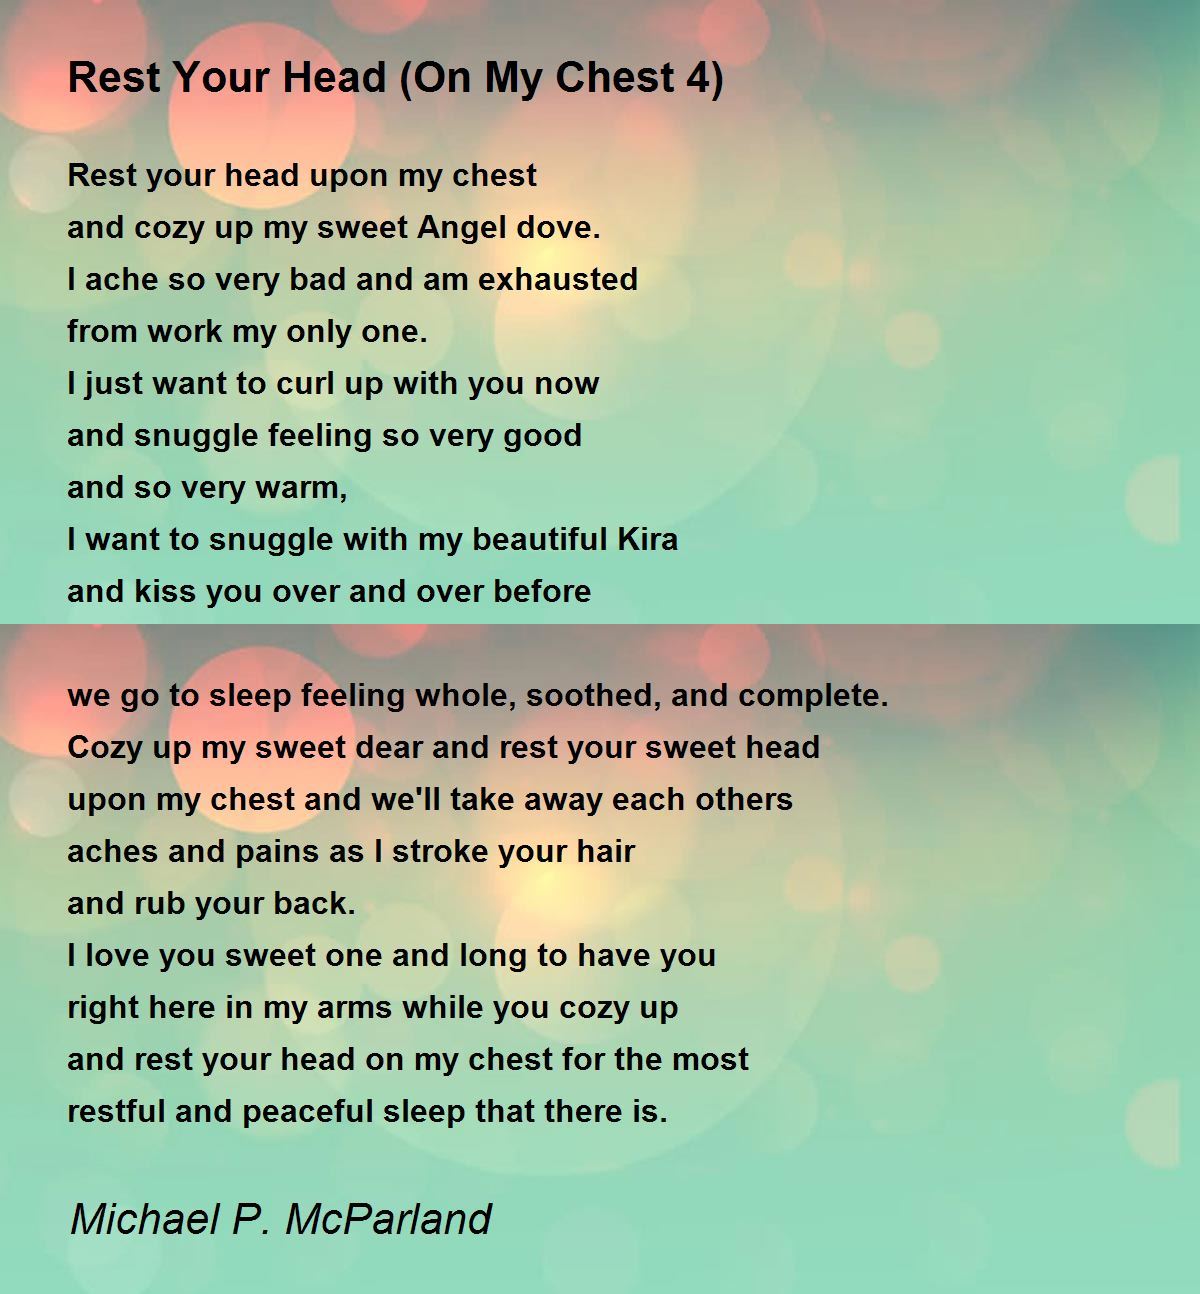 Rest Your Head (On My Chest 4) - Rest Your Head (On My Chest 4